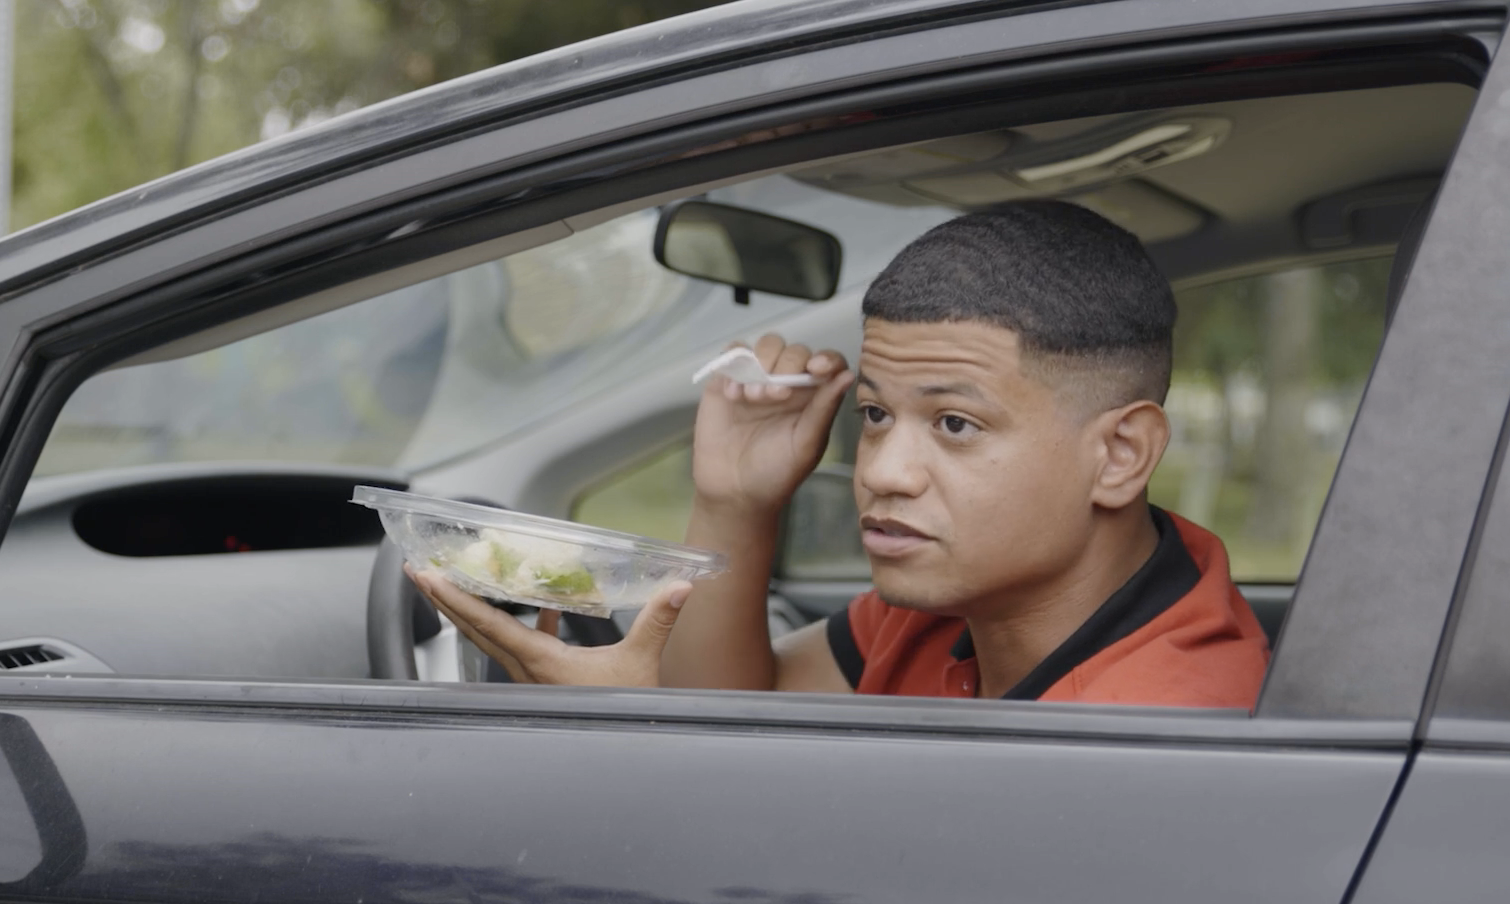 gadiel in a car&#x27;s driver&#x27;s seat holding a salad